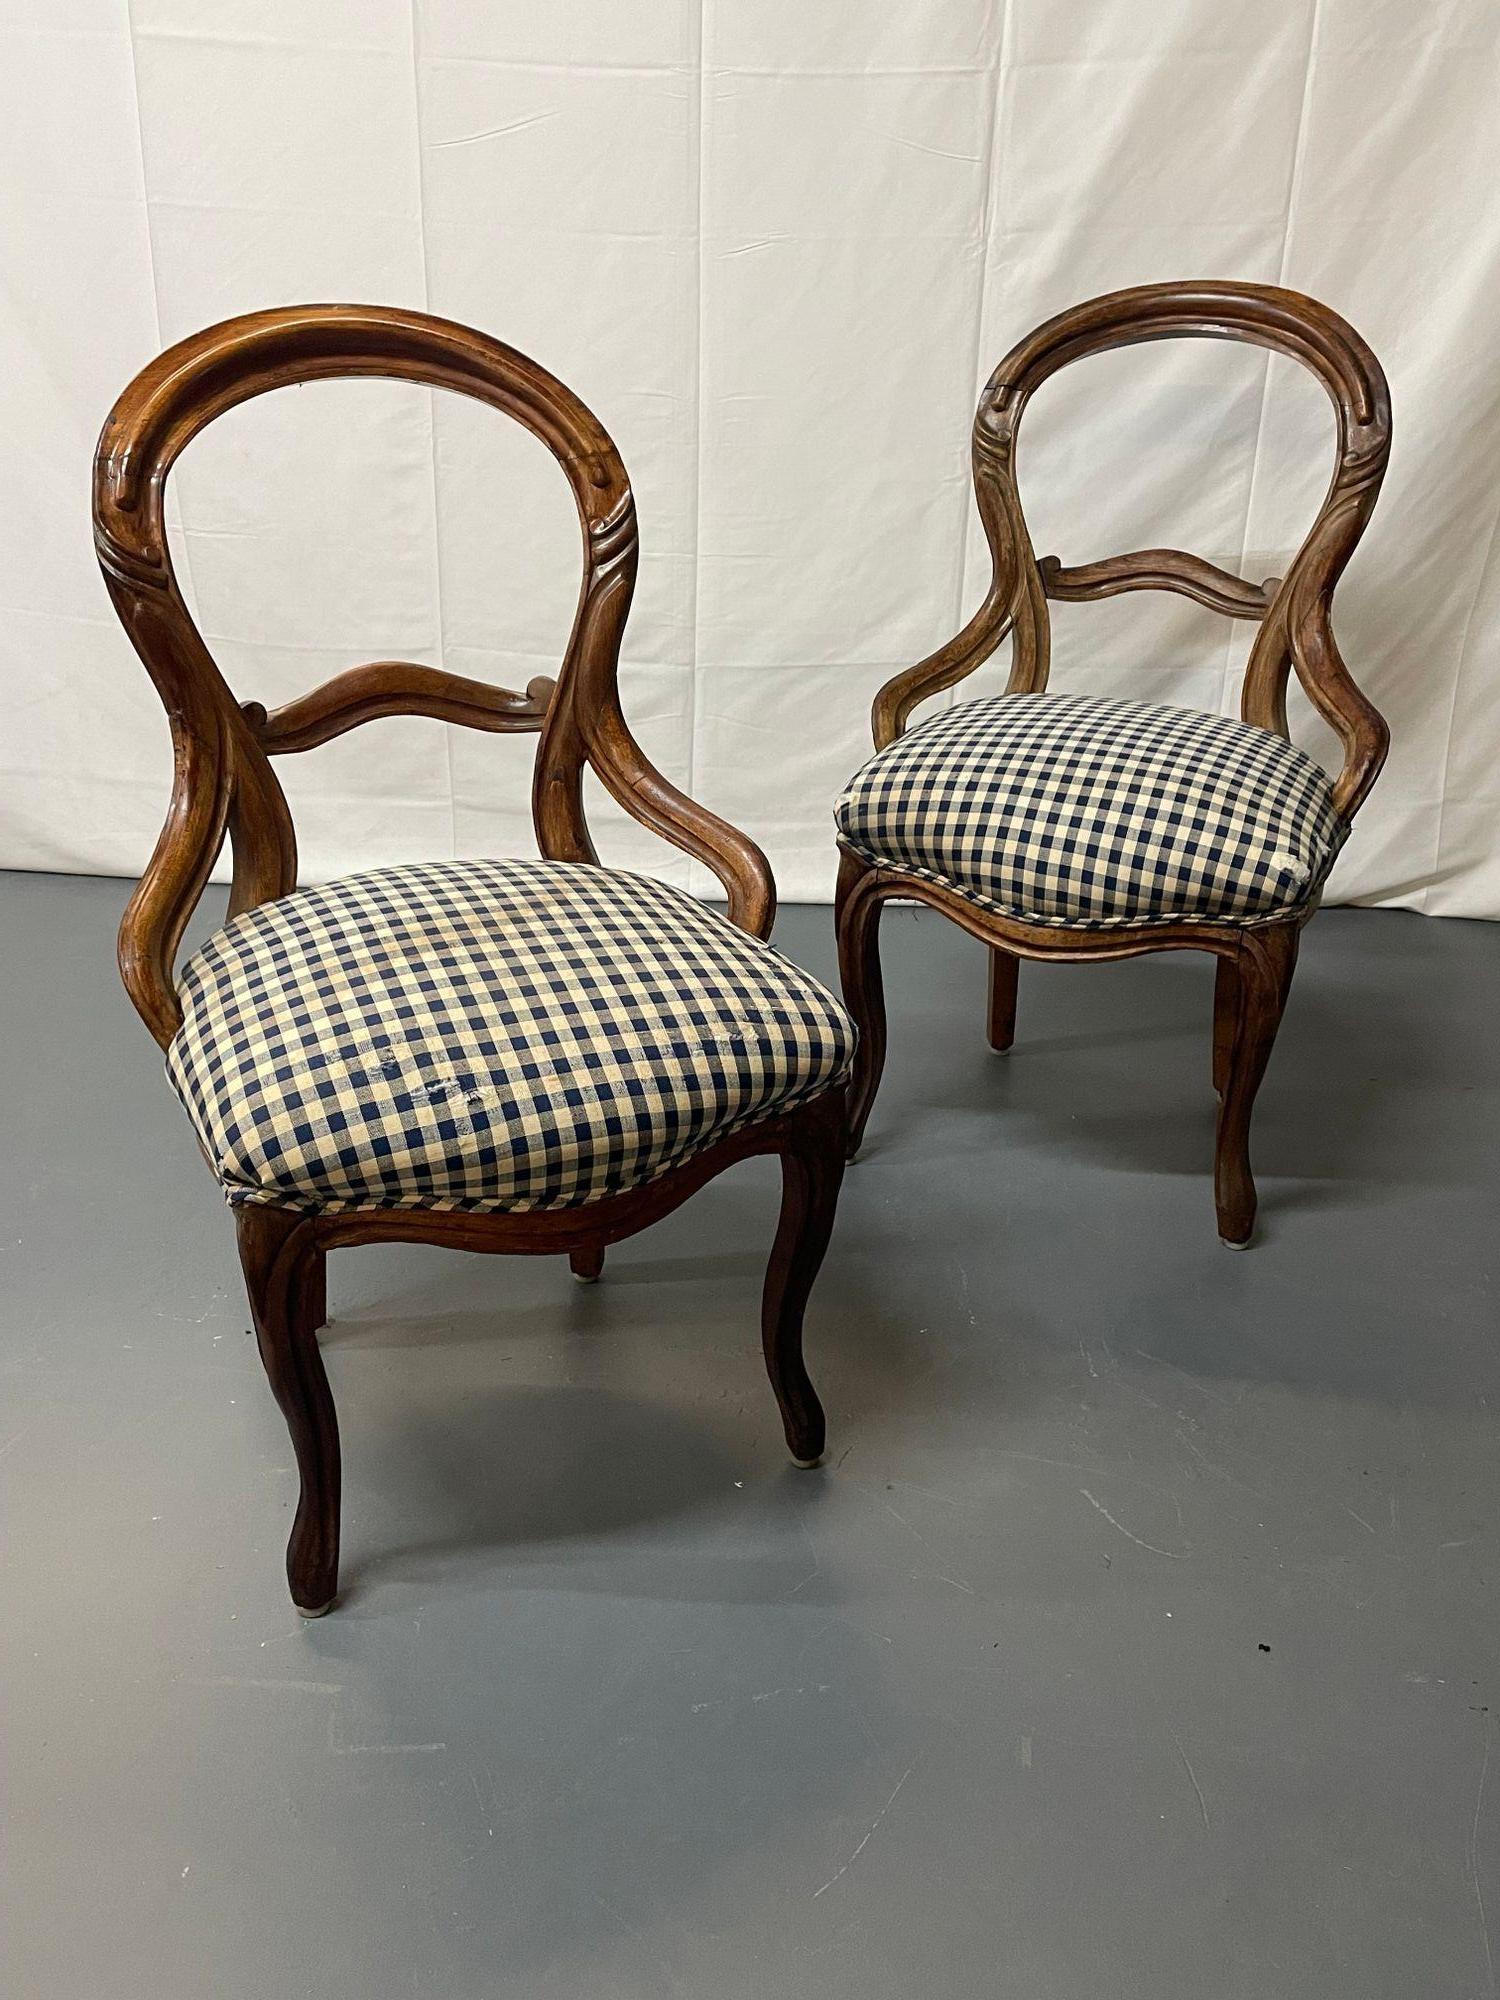 Pair of early Victorian John Henry Belter style side / accent chairs, American.
 
A pair of Victorian era side chairs in the manner of John Henry Belter featuring classic oval backs and curved legs. These early 19th century pieces bear some old